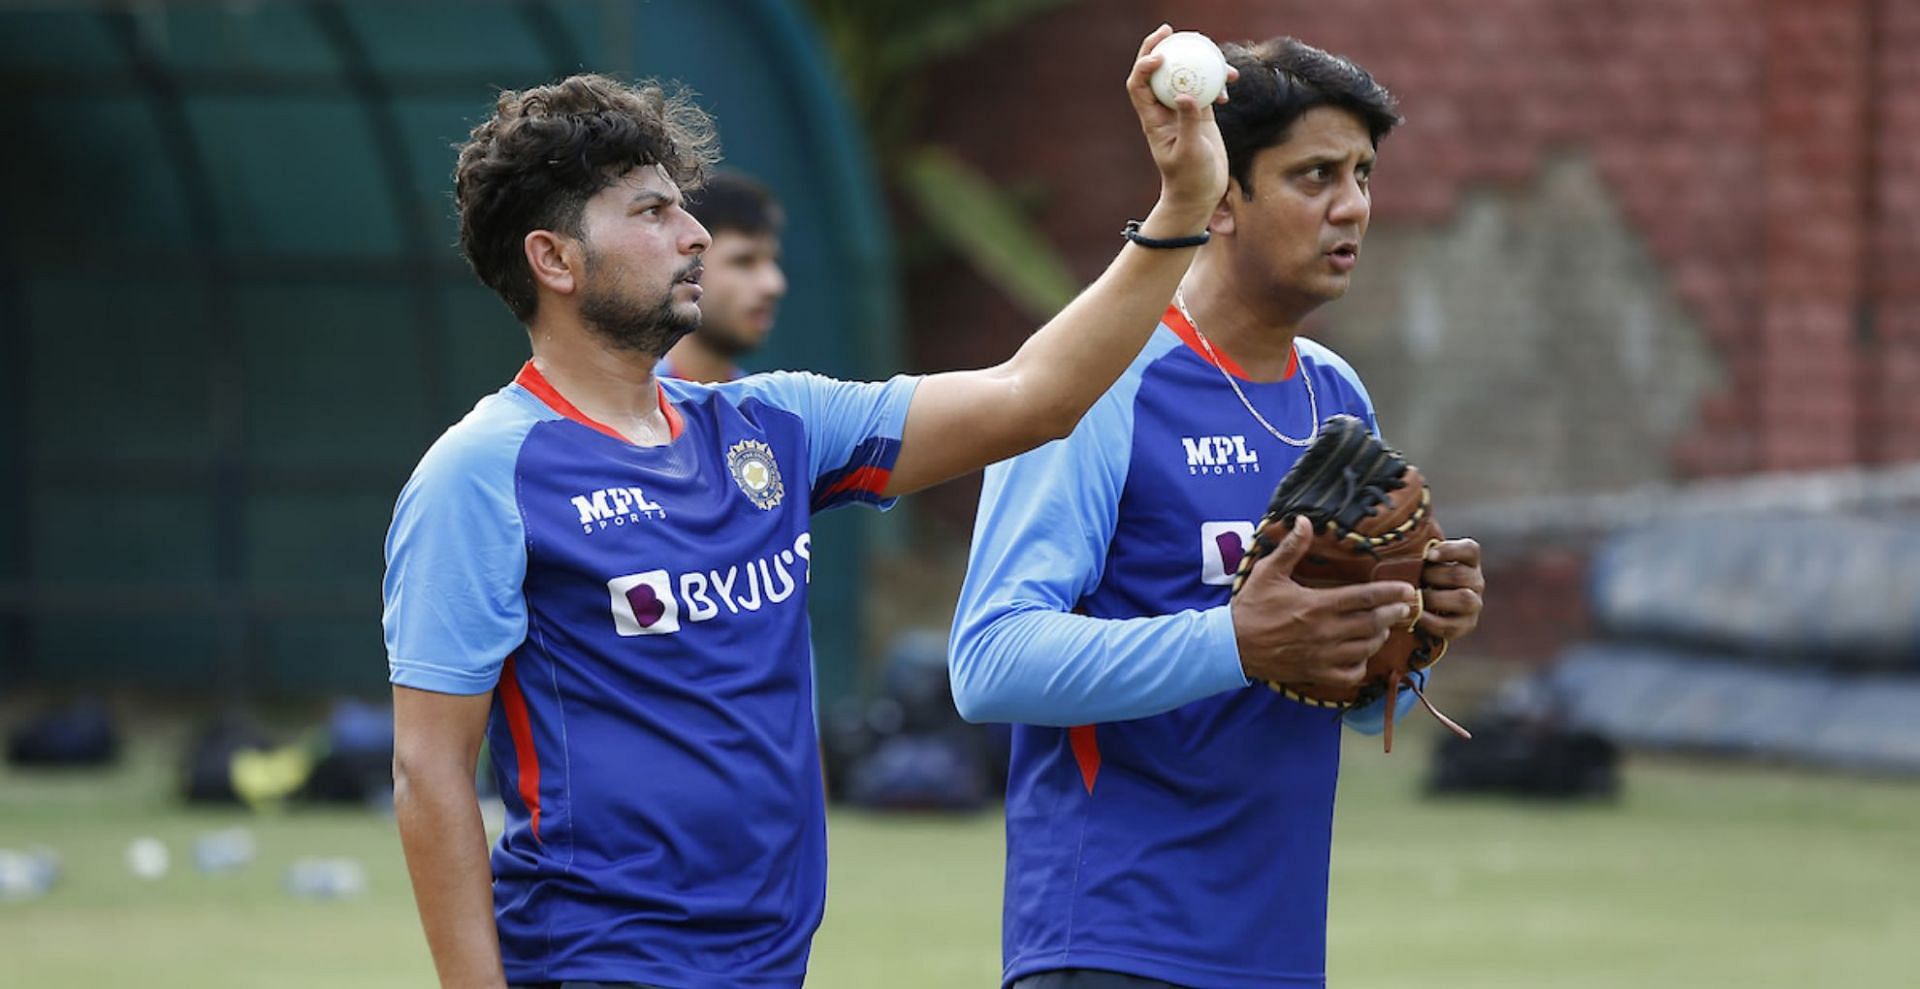 Kuldeep Yadav has been ruled out of the entire series with a hand injury (Credit: BCCI/Twitter).